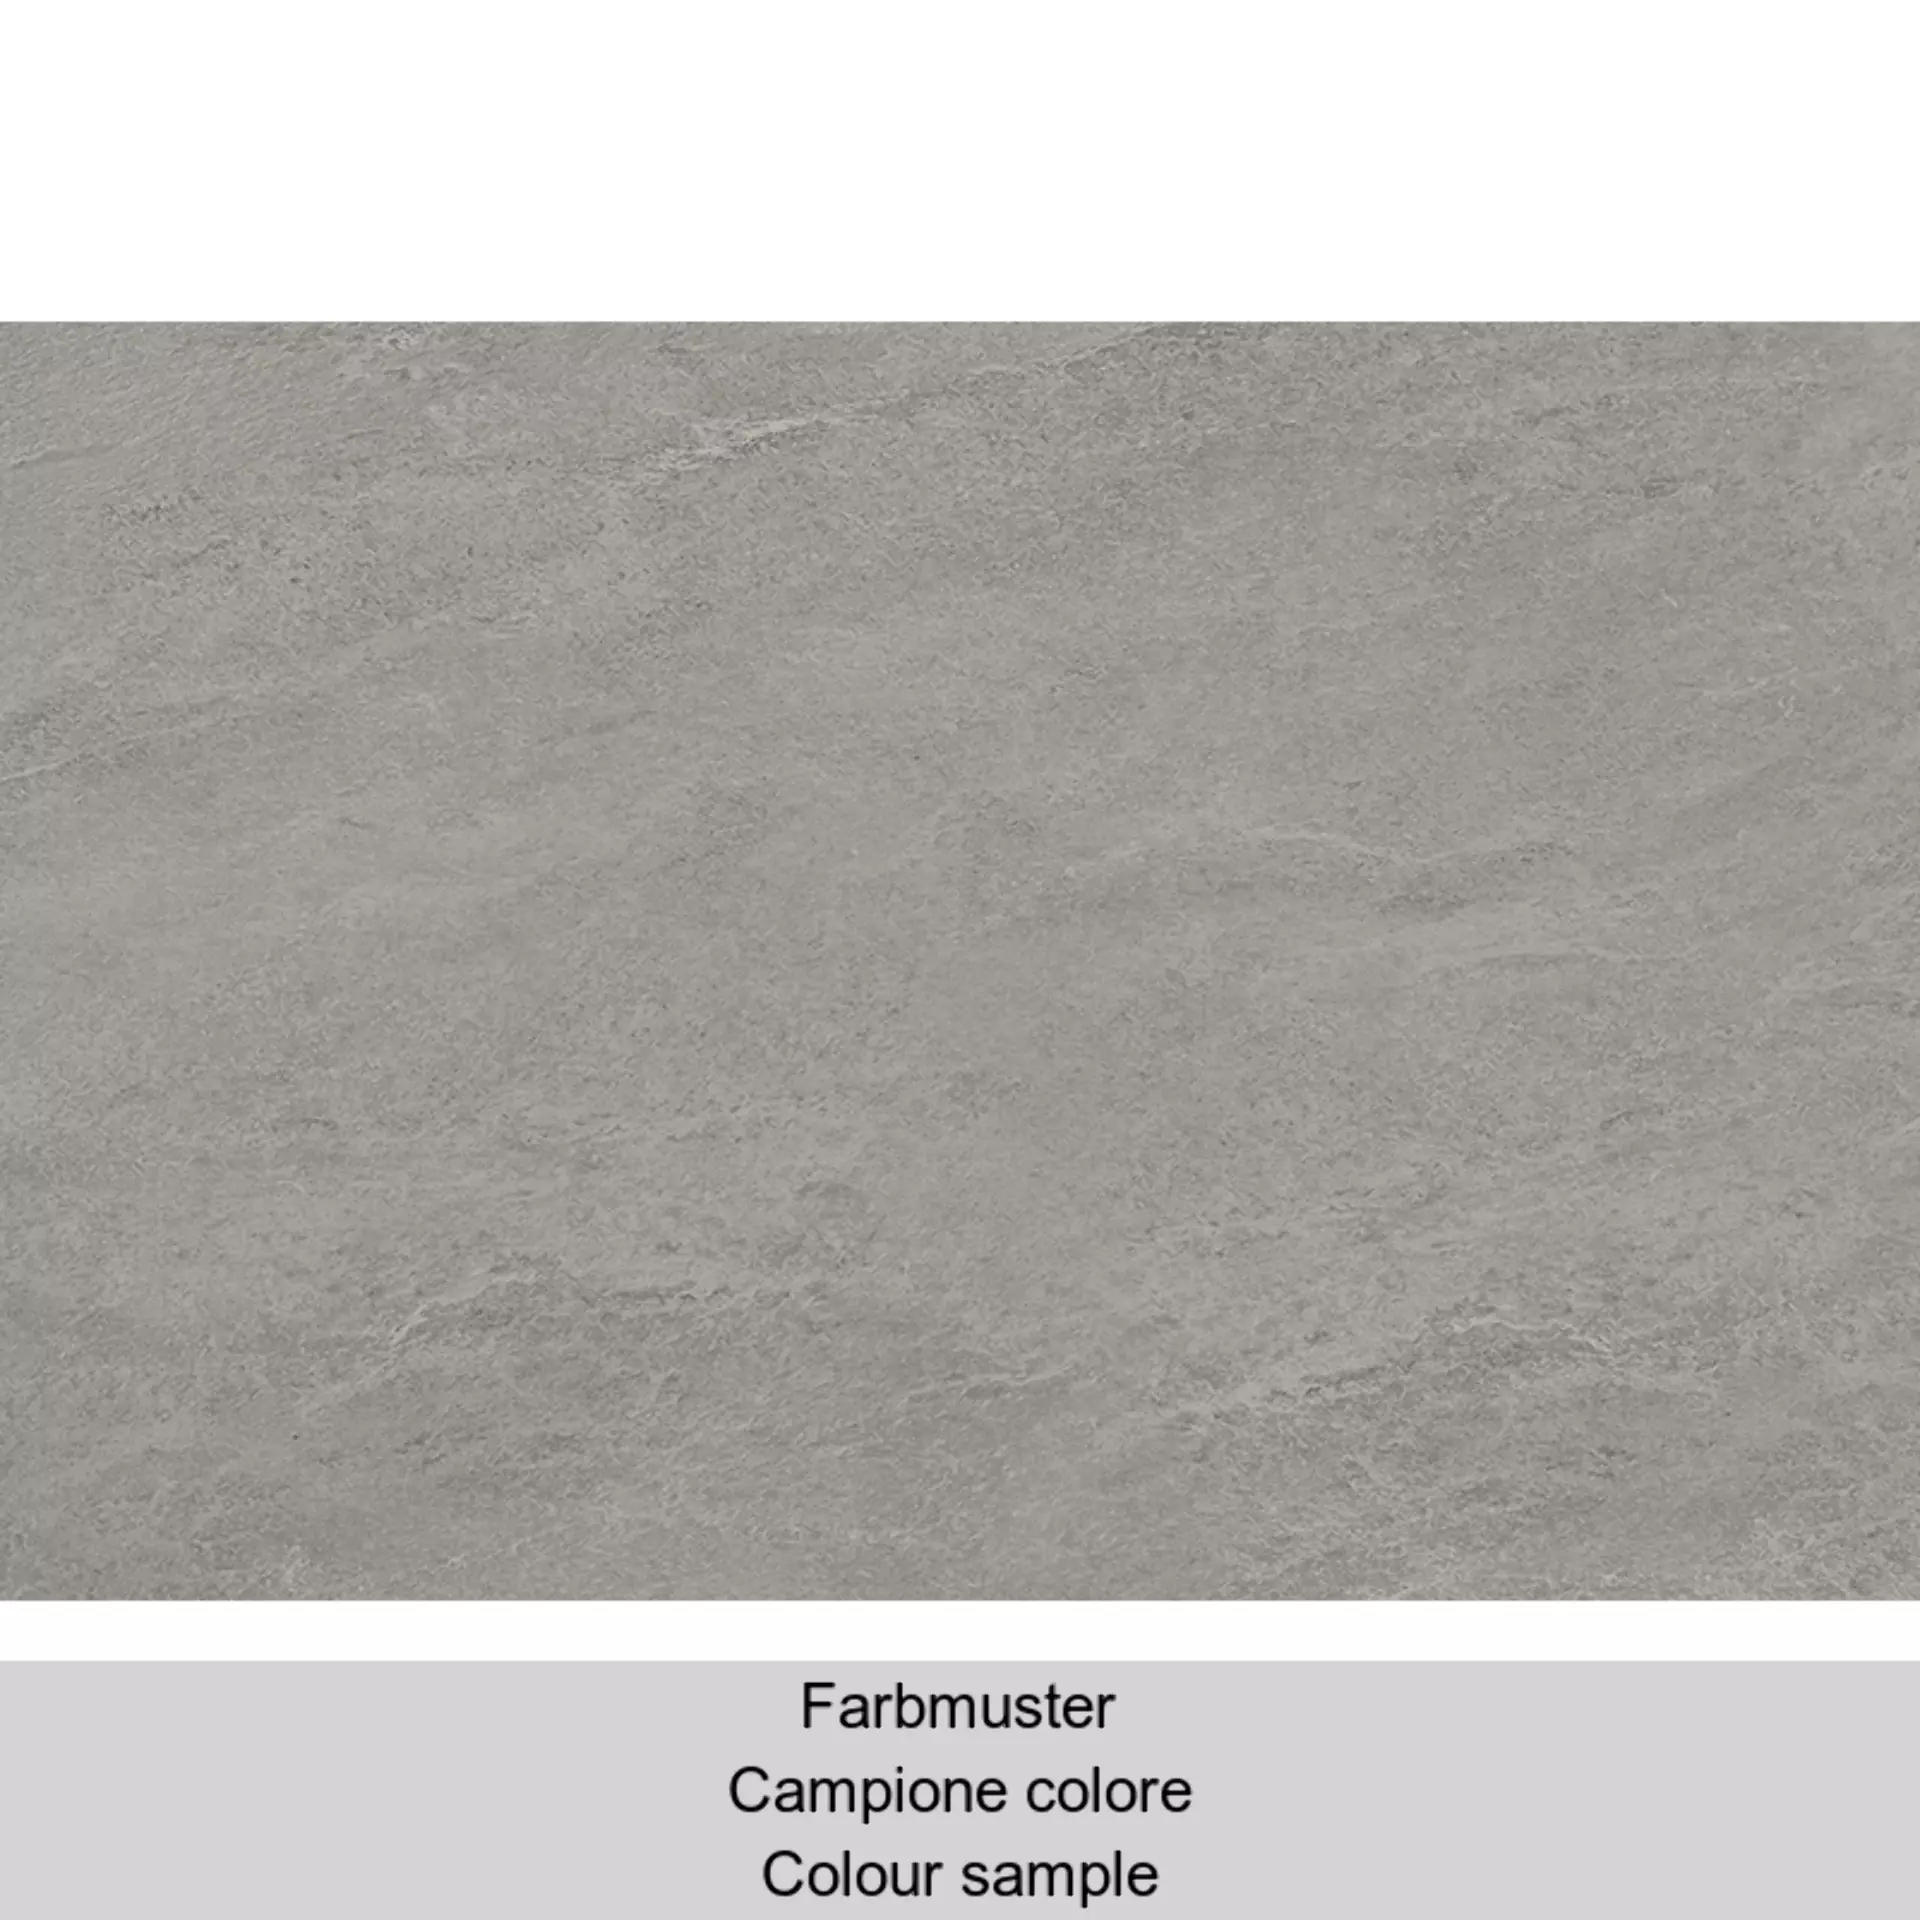 Novabell Norgestone Light Grey Outwalk – Naturale Module 3 Formati NSTM133 60x90cm 20mm